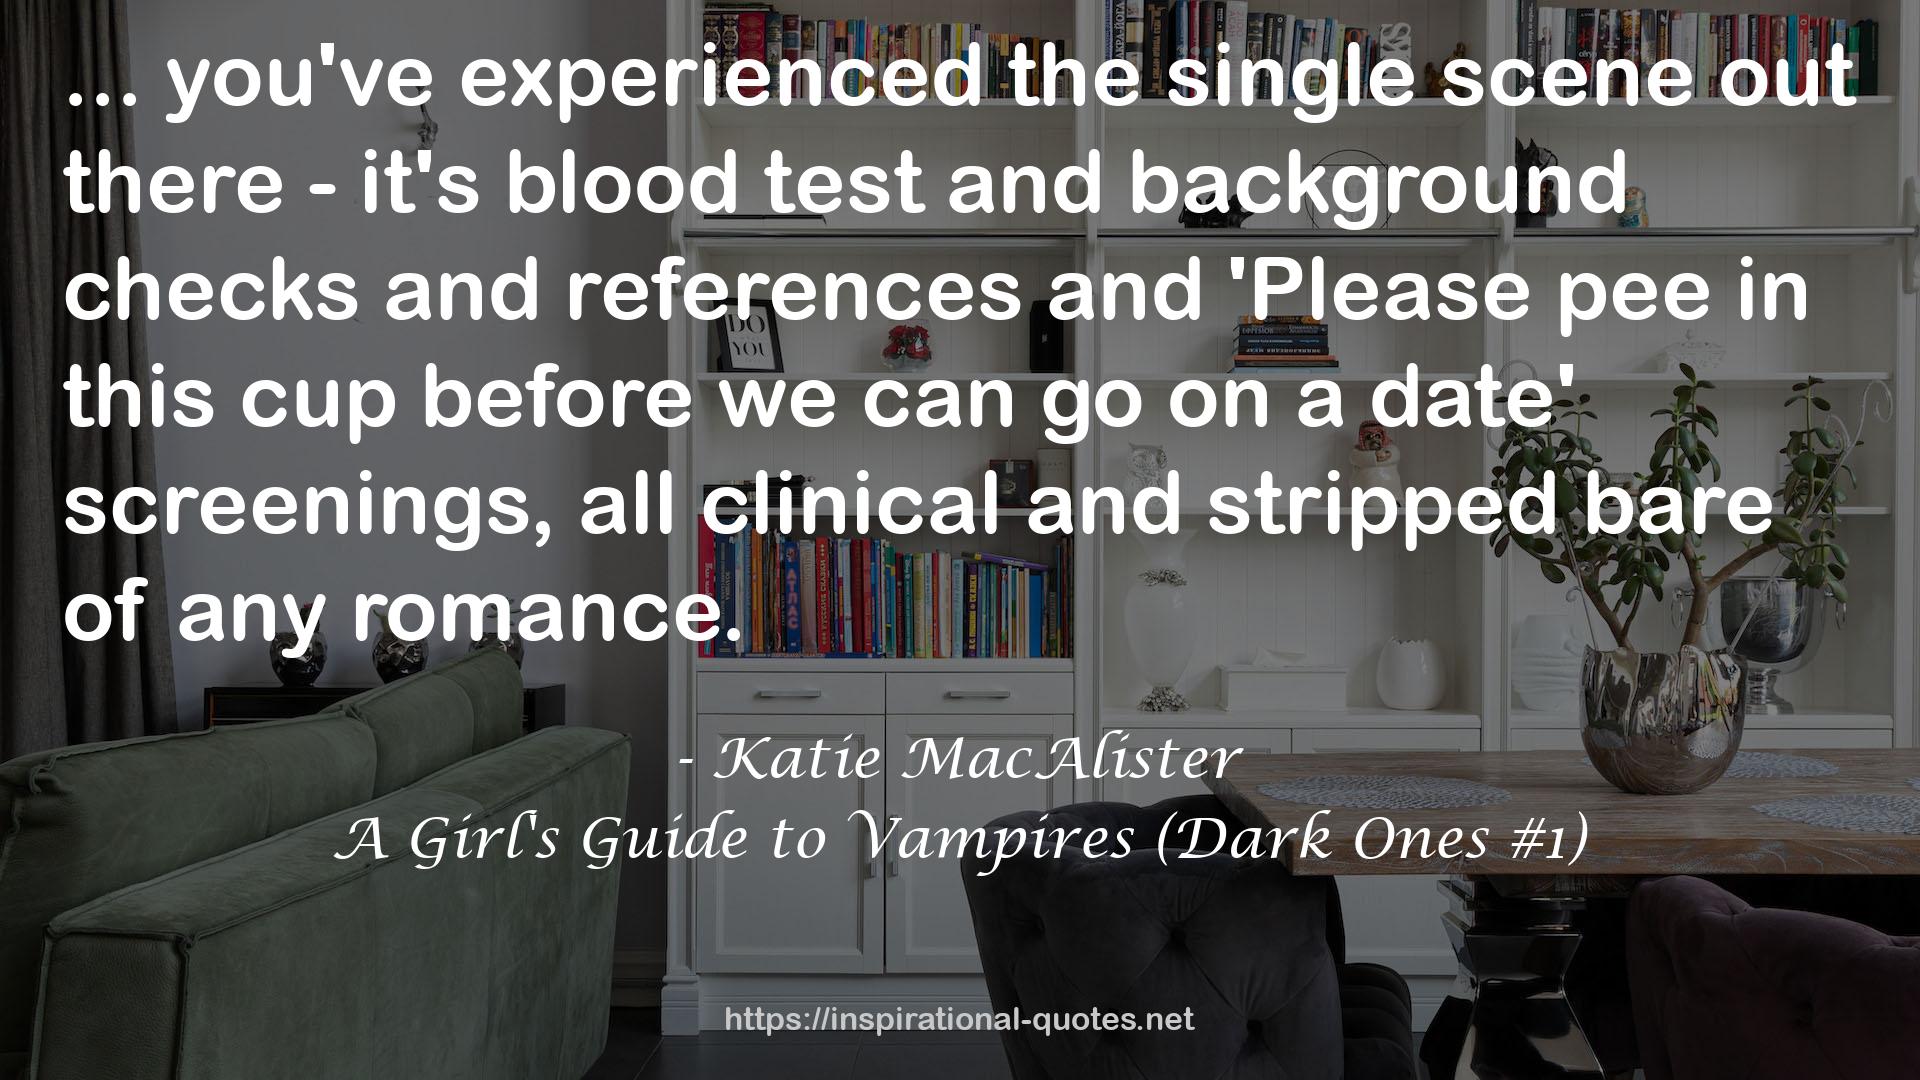 A Girl's Guide to Vampires (Dark Ones #1) QUOTES